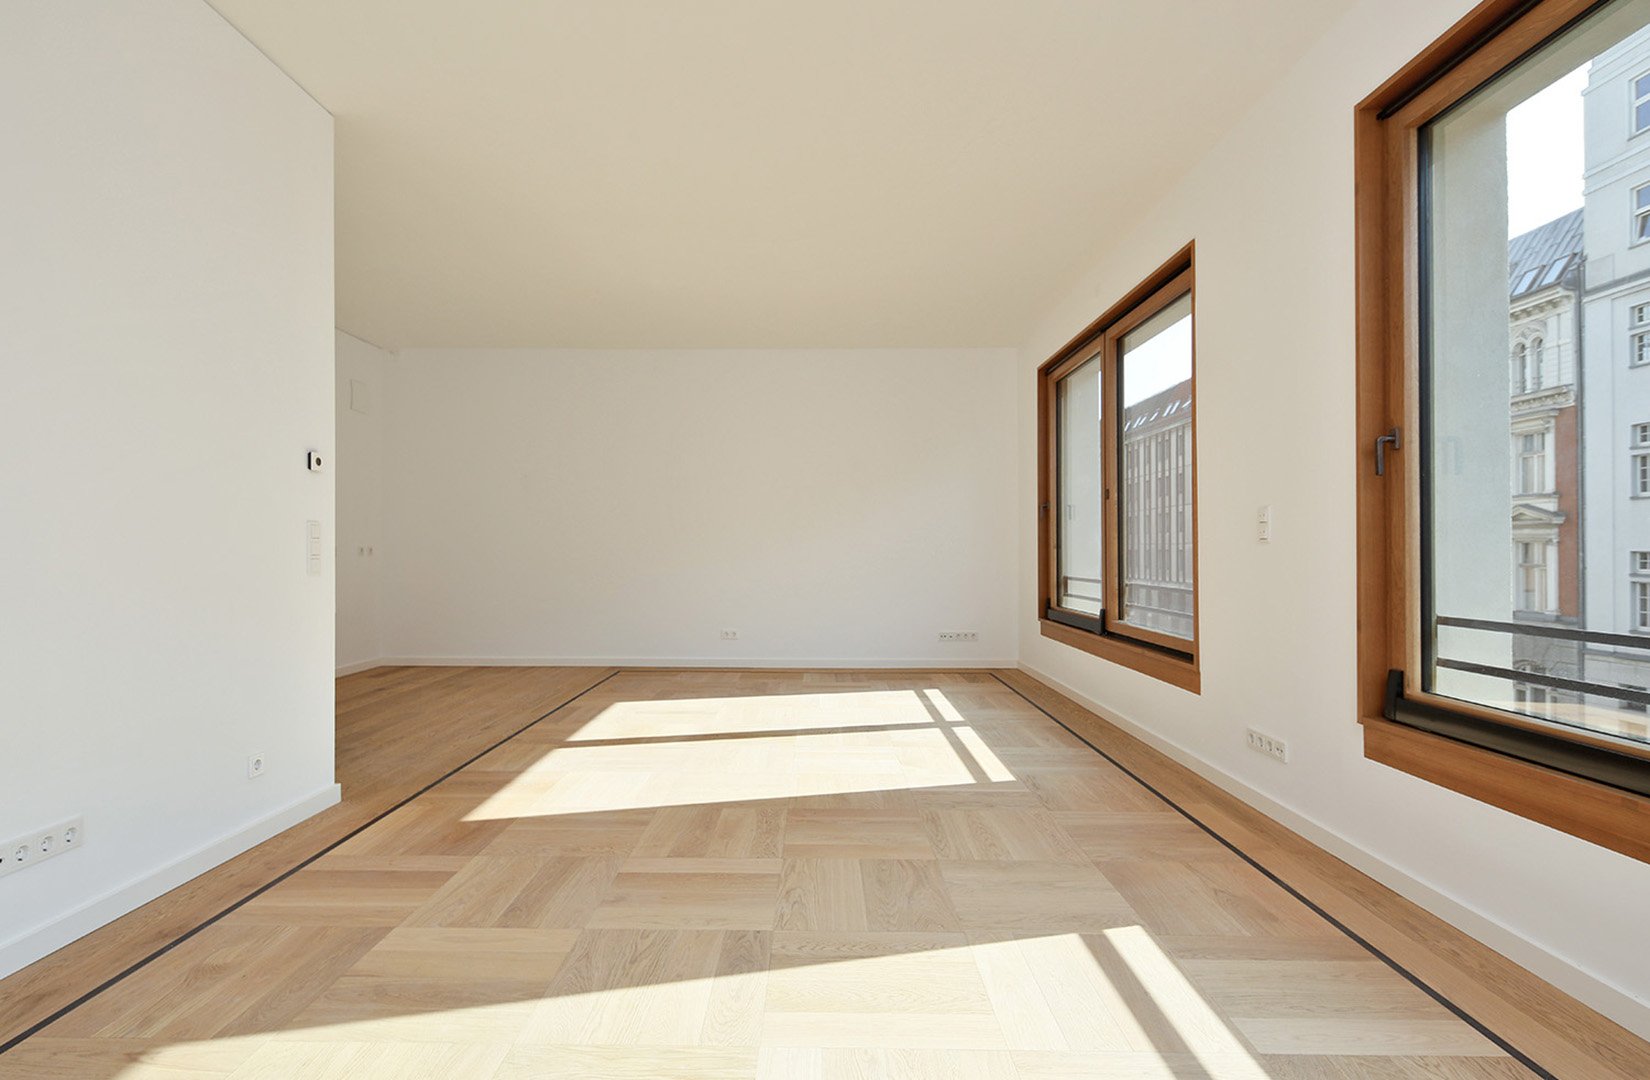 Palais Varnhagen by David Chipperfield luxury real estate successfully sold